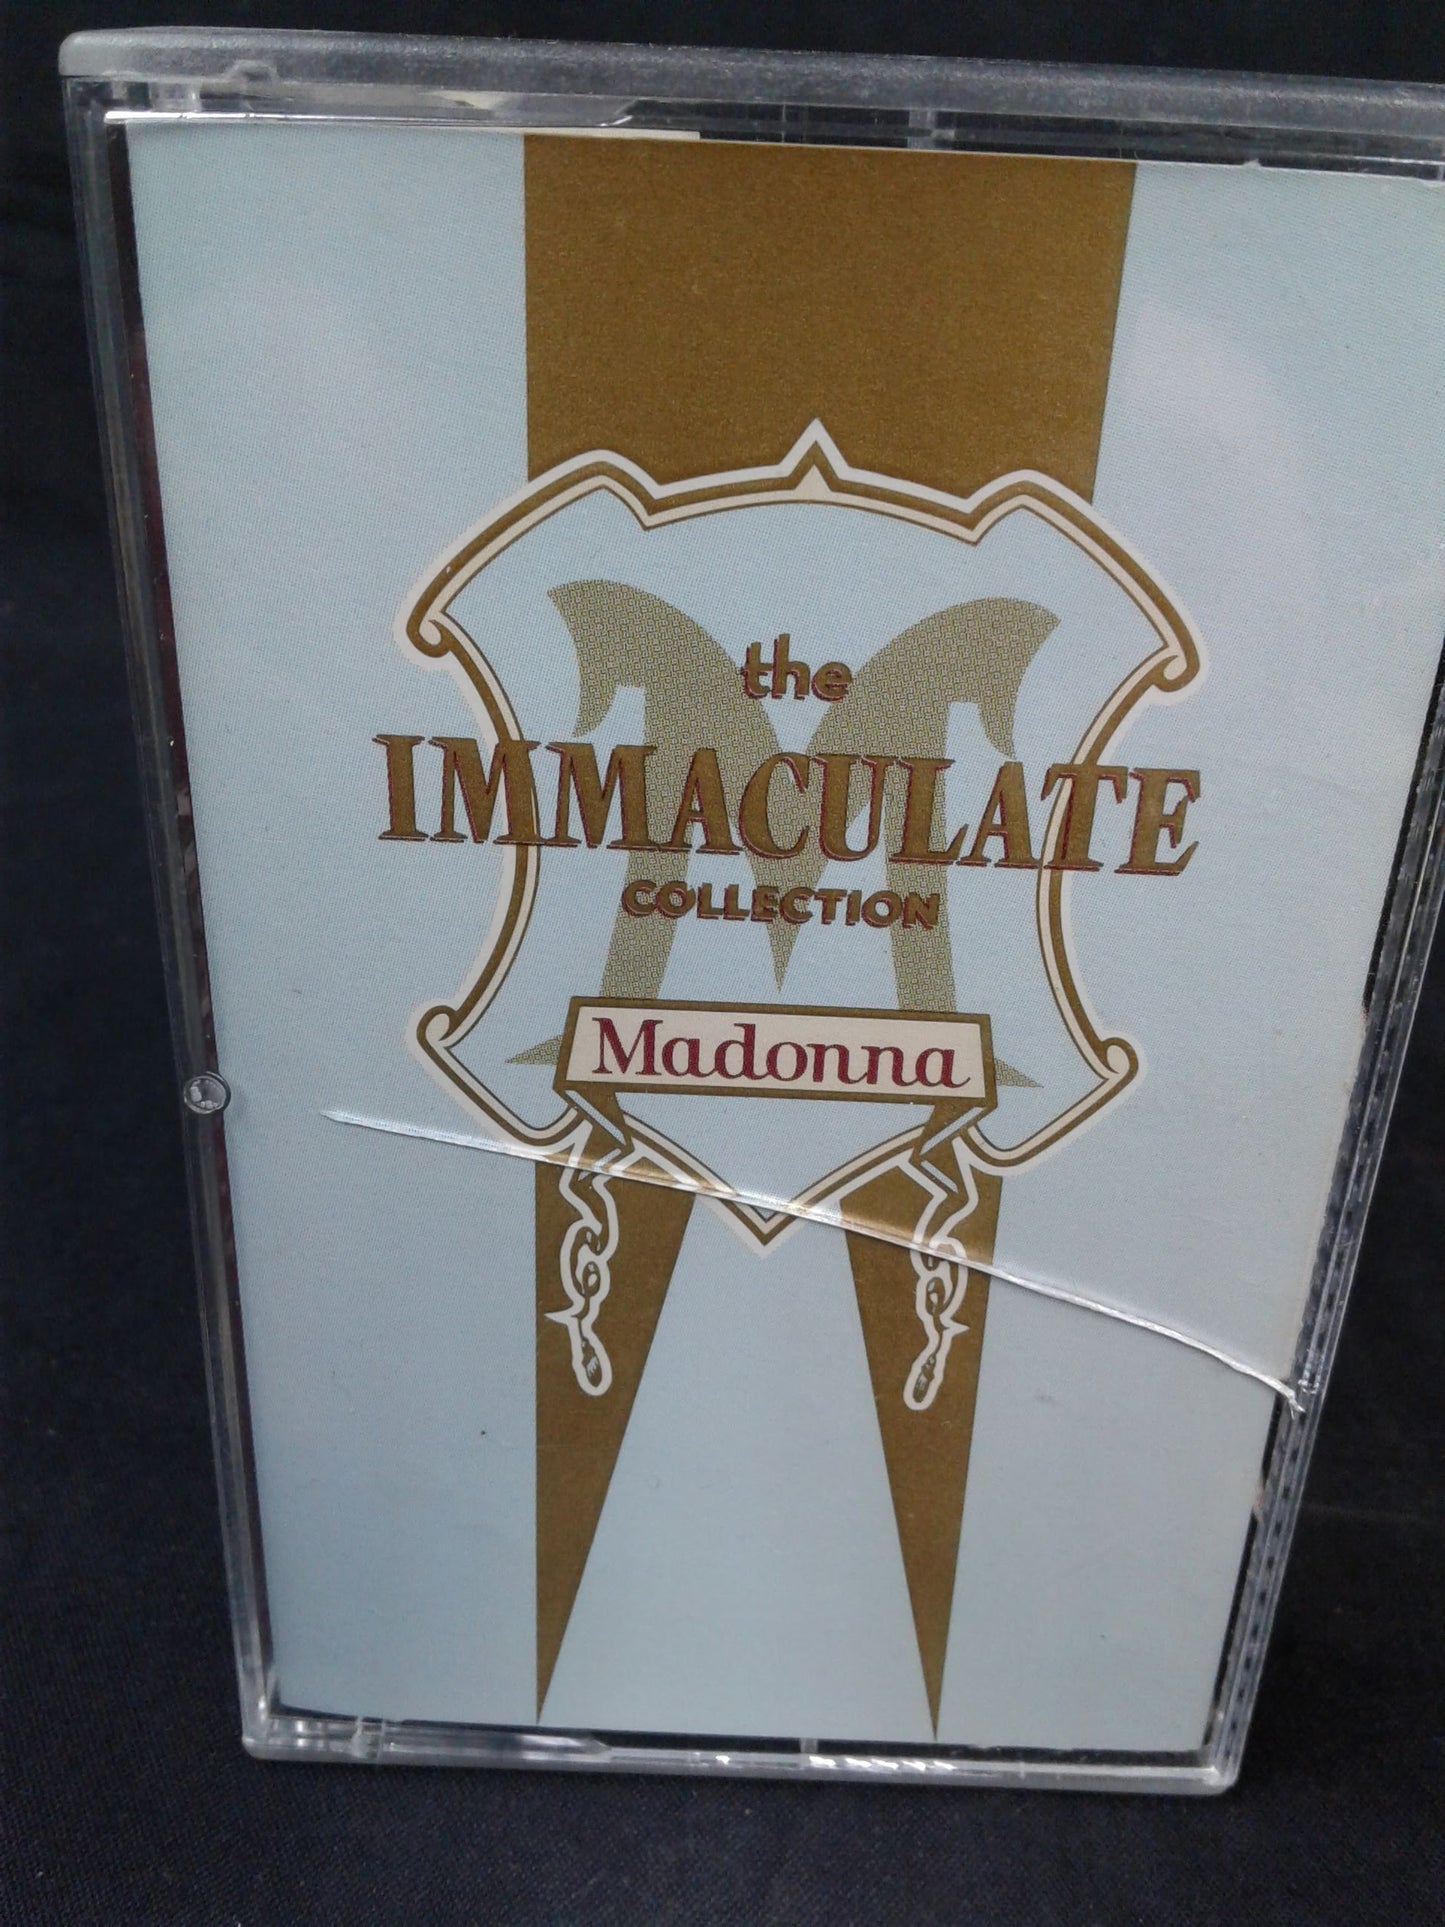 Cassette Madona The immaculate collection